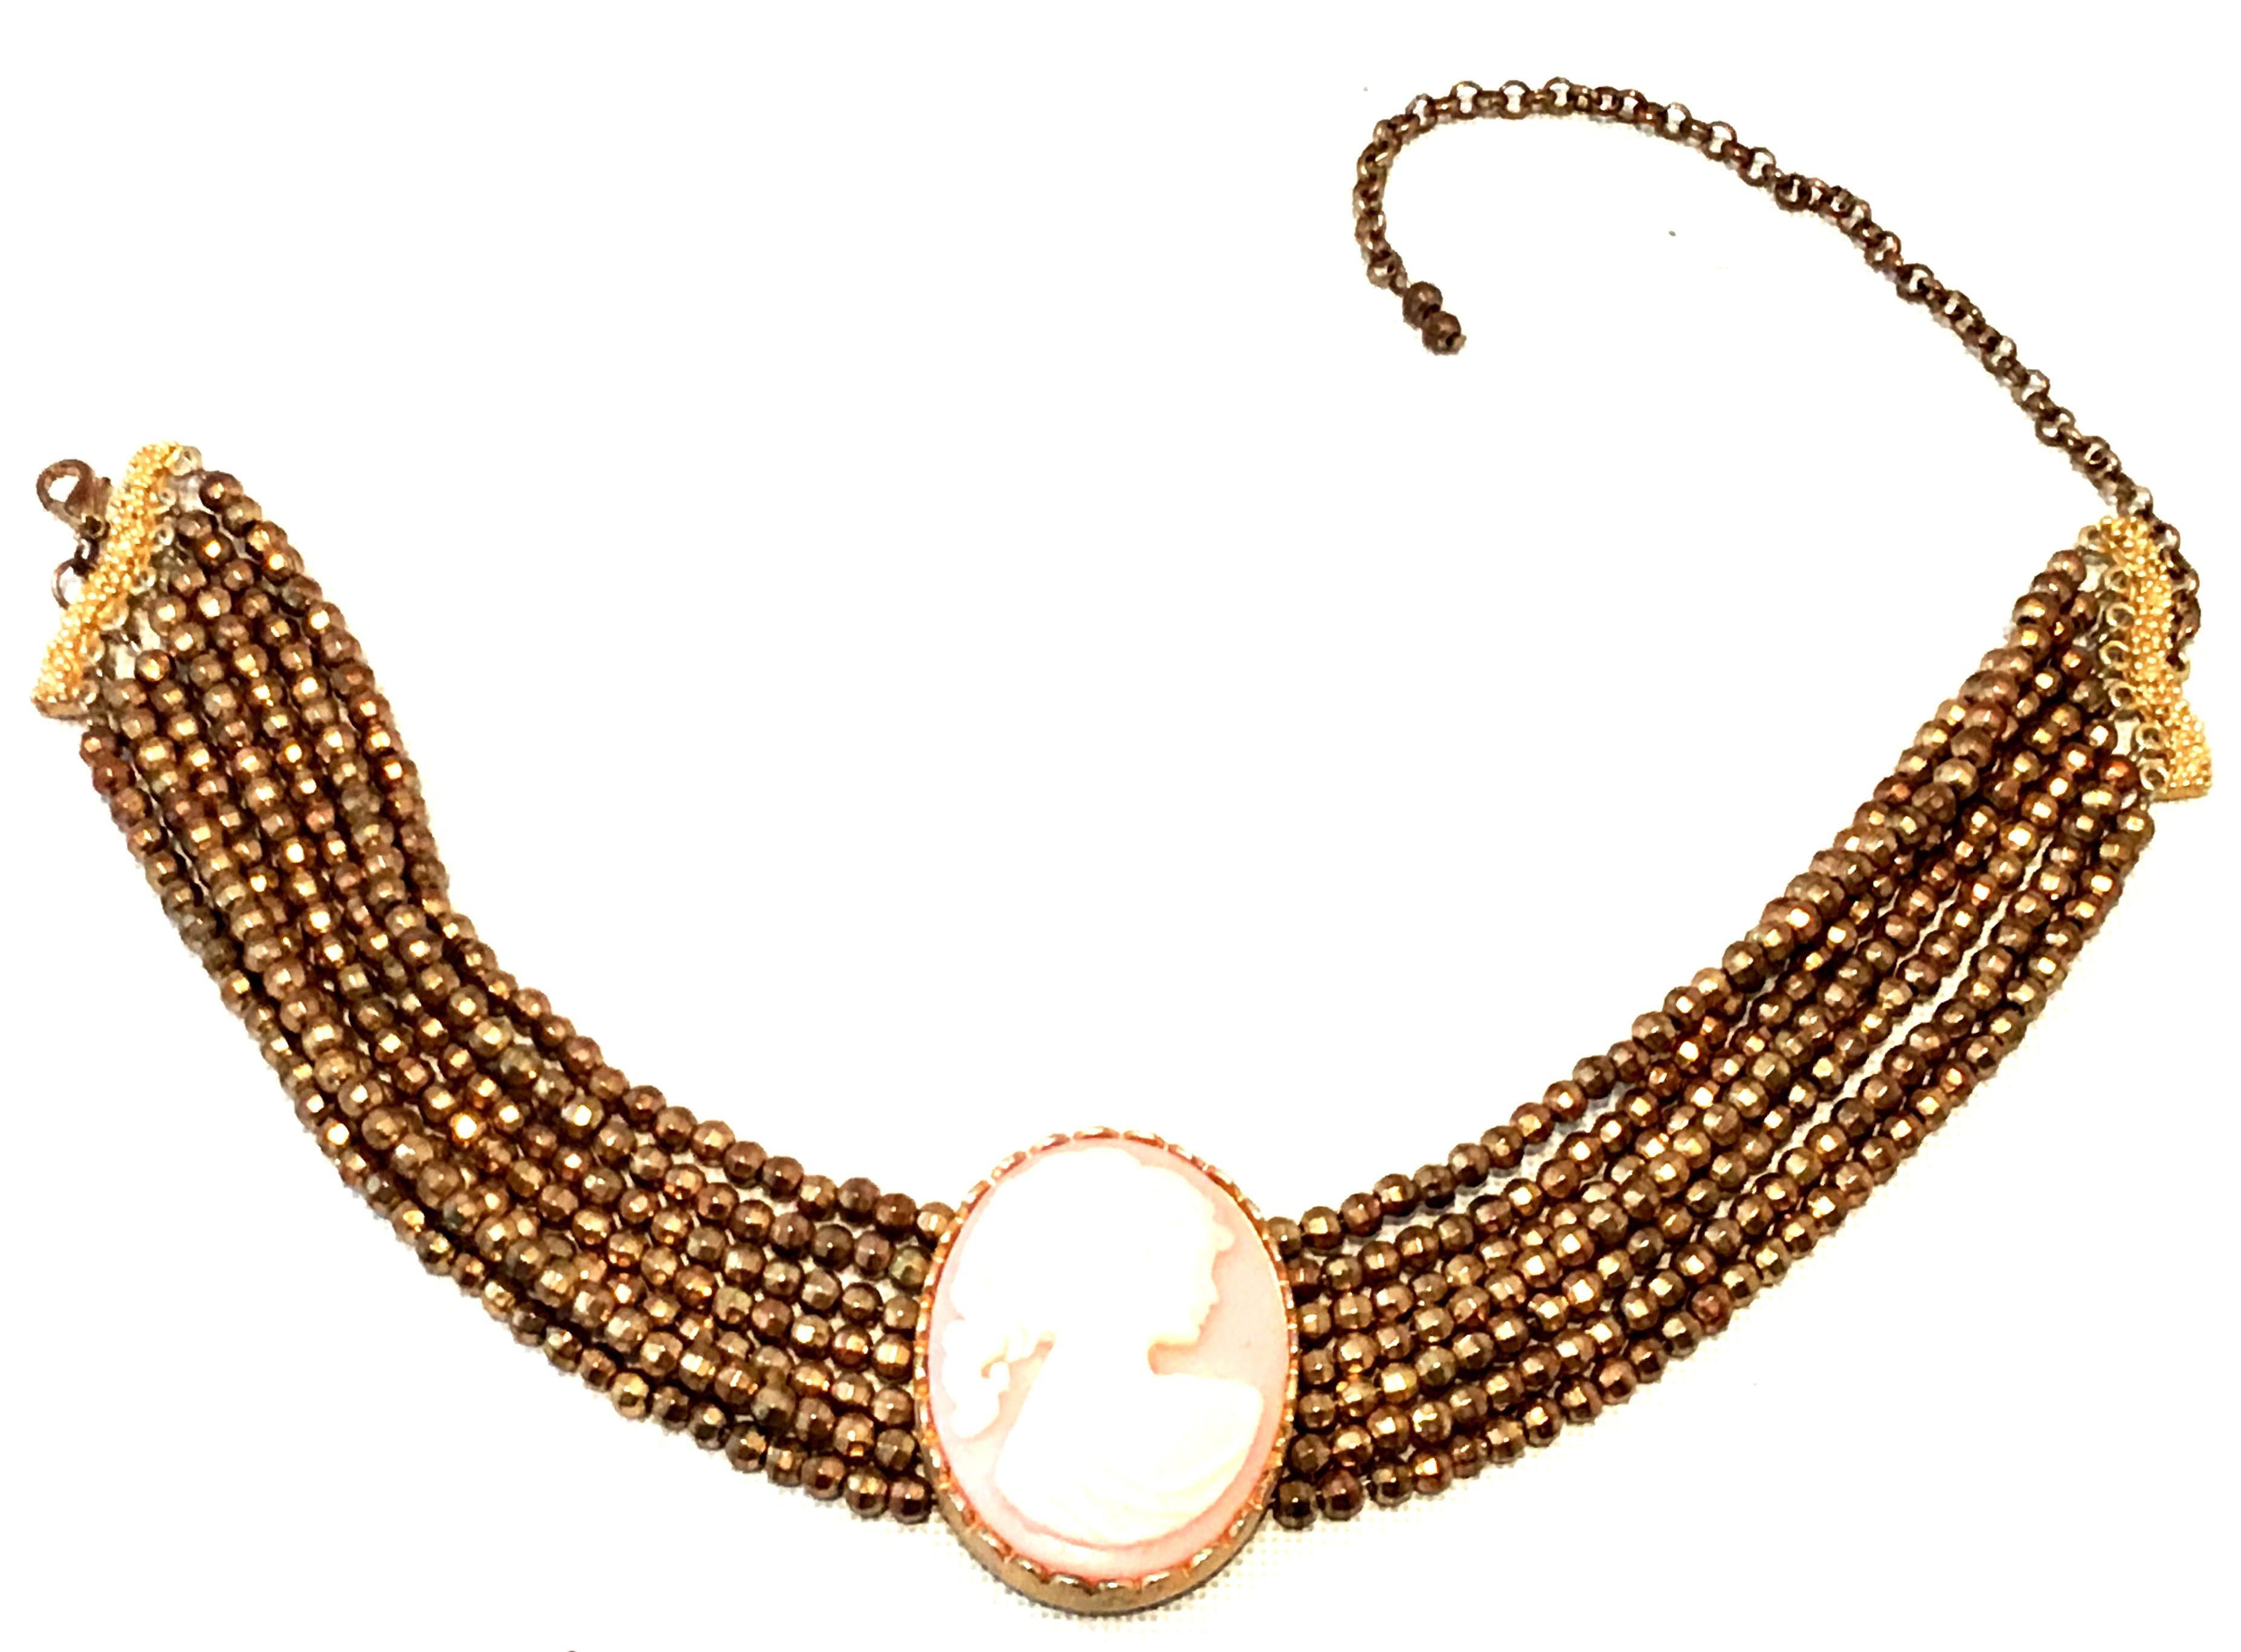 20th Century Gold Bead & Carved Lucite Cameo Choker Style Necklace In Good Condition For Sale In West Palm Beach, FL